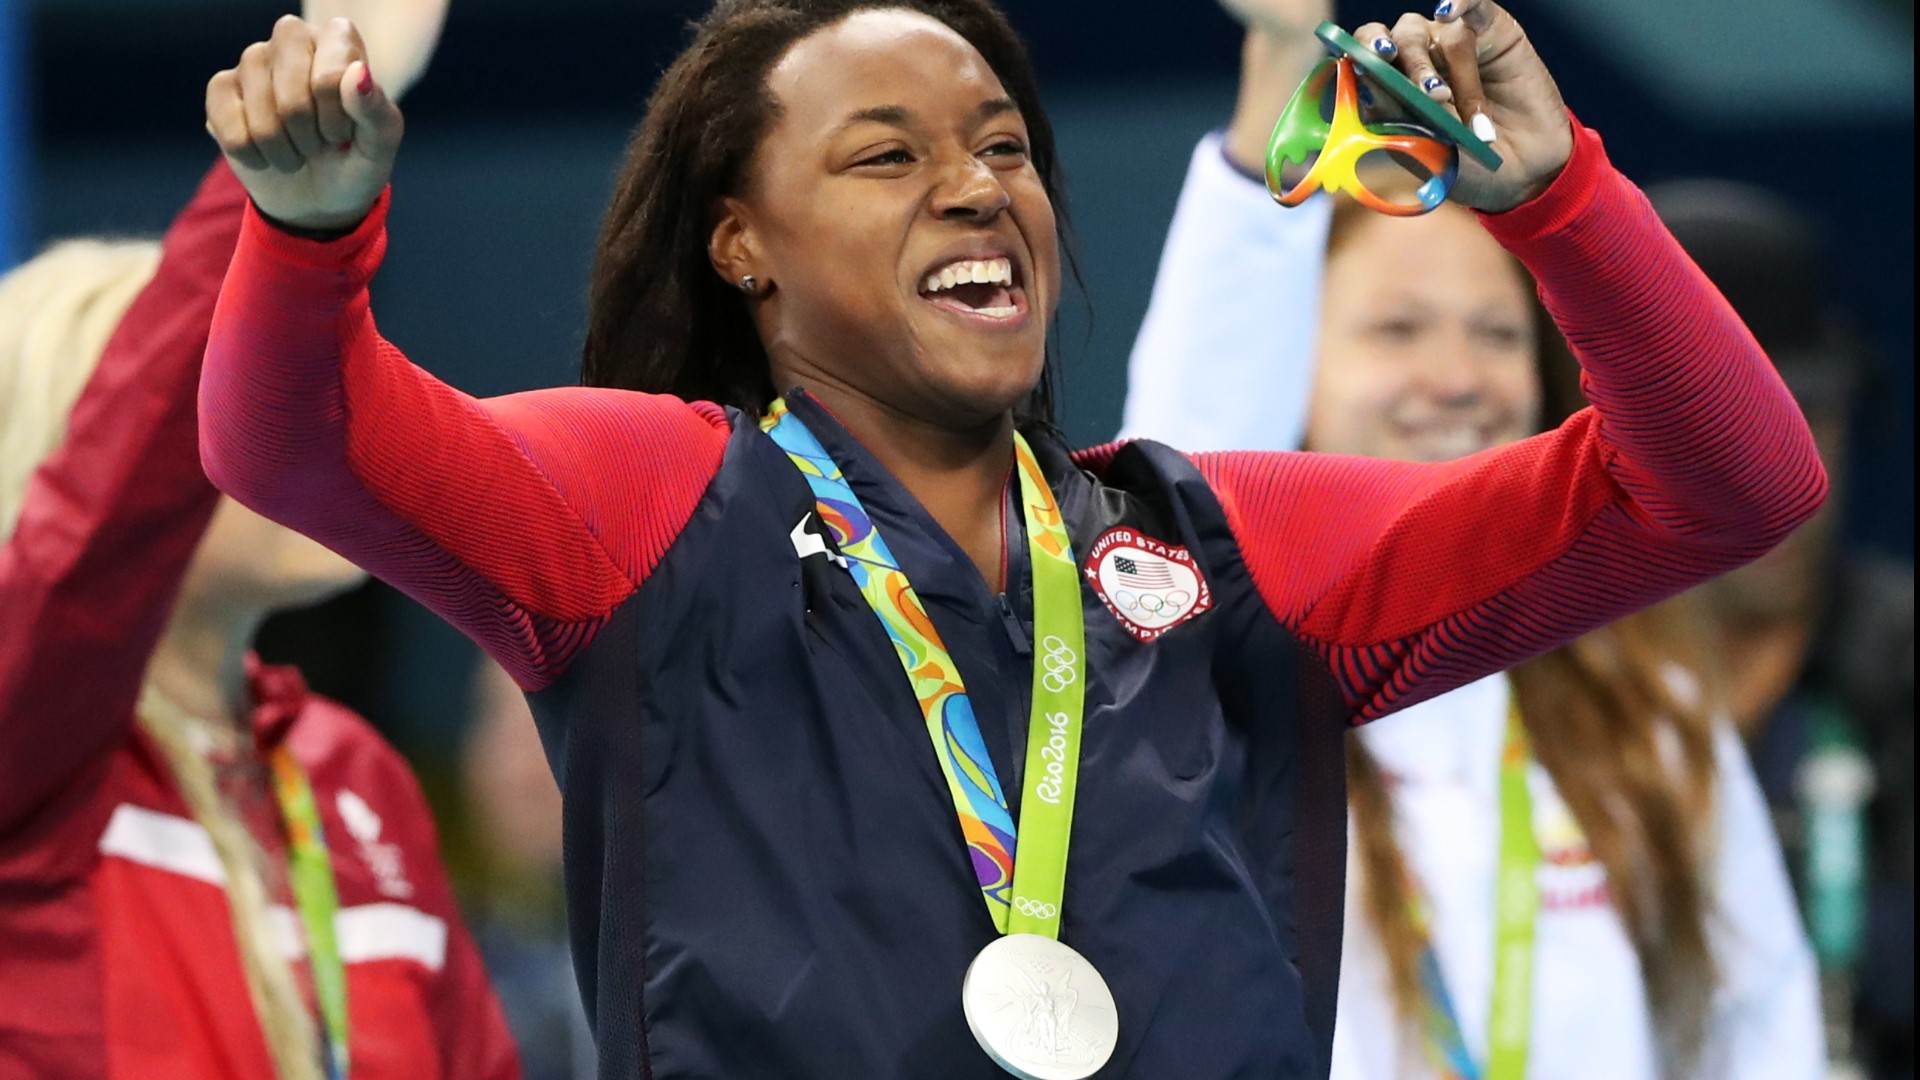 Simone Manuel was the first African American woman to win individual swimming gold during the 2016 Rio Olympic Games.